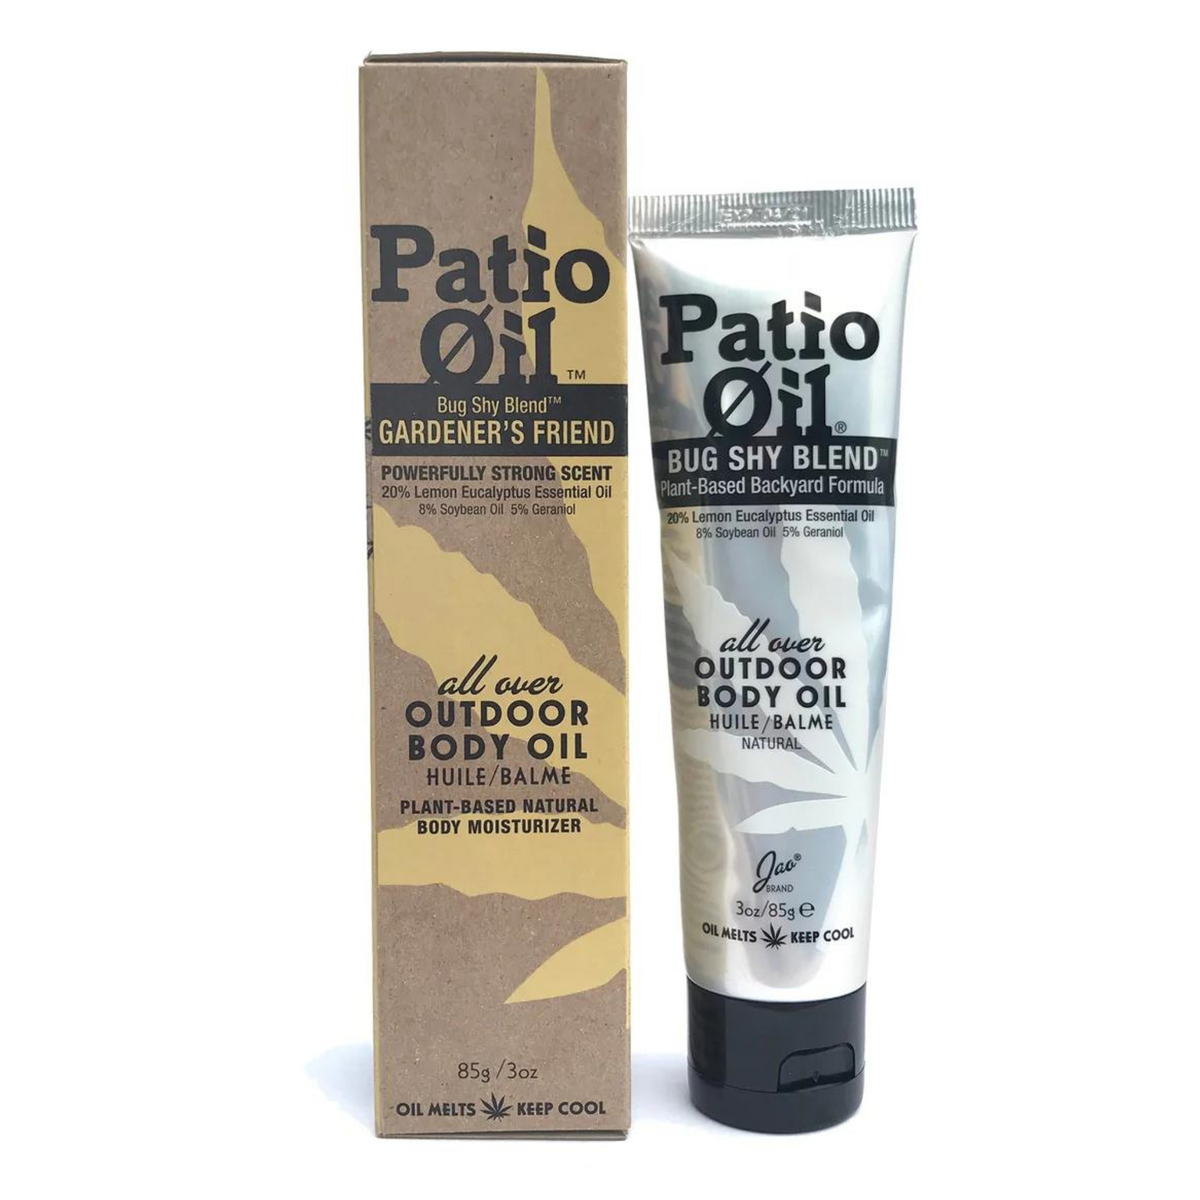 Primary Image of Jao Brand Patio Oil Sunset Blend Body Oil 